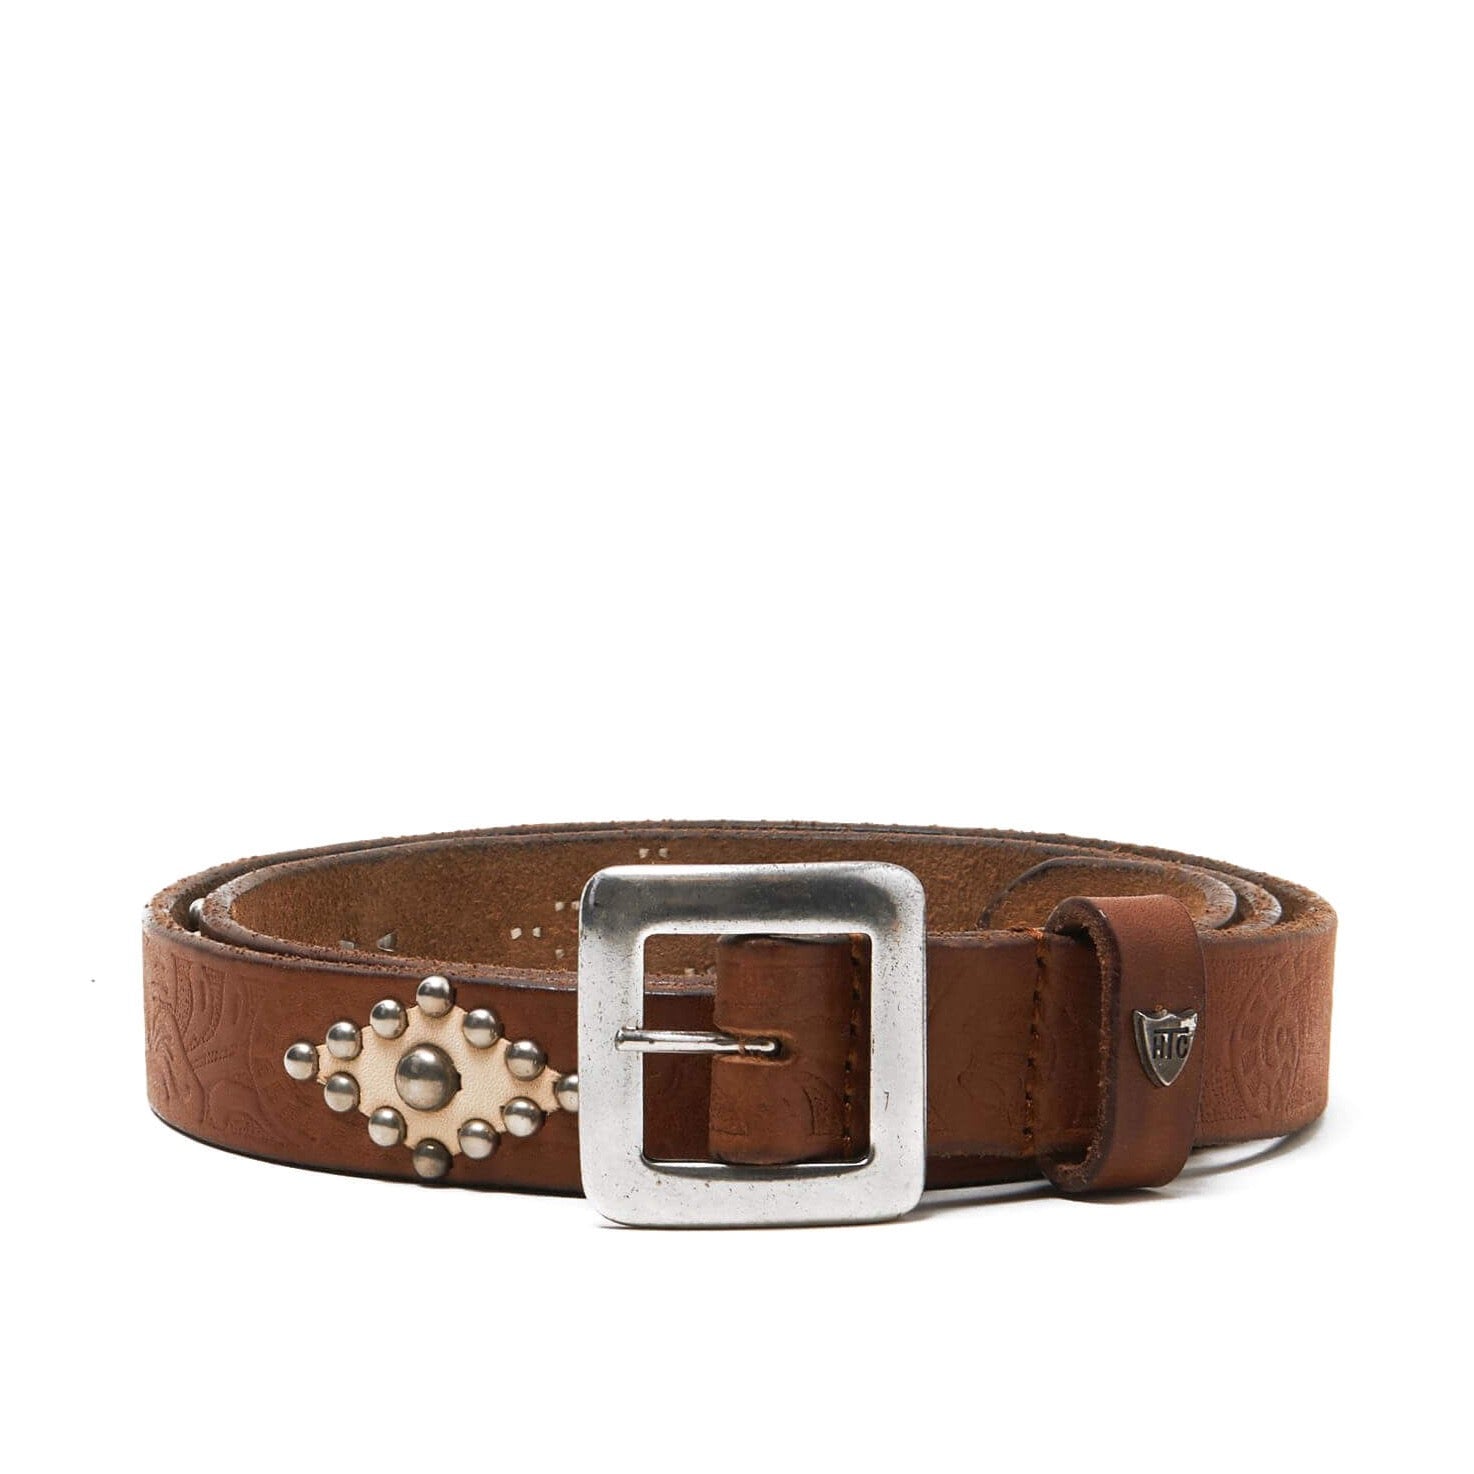 ROUGH ROCK BELT Cognac leather belt, rhombus leather details with glass stones, 3 cm height. Made in Italy HTC LOS ANGELES